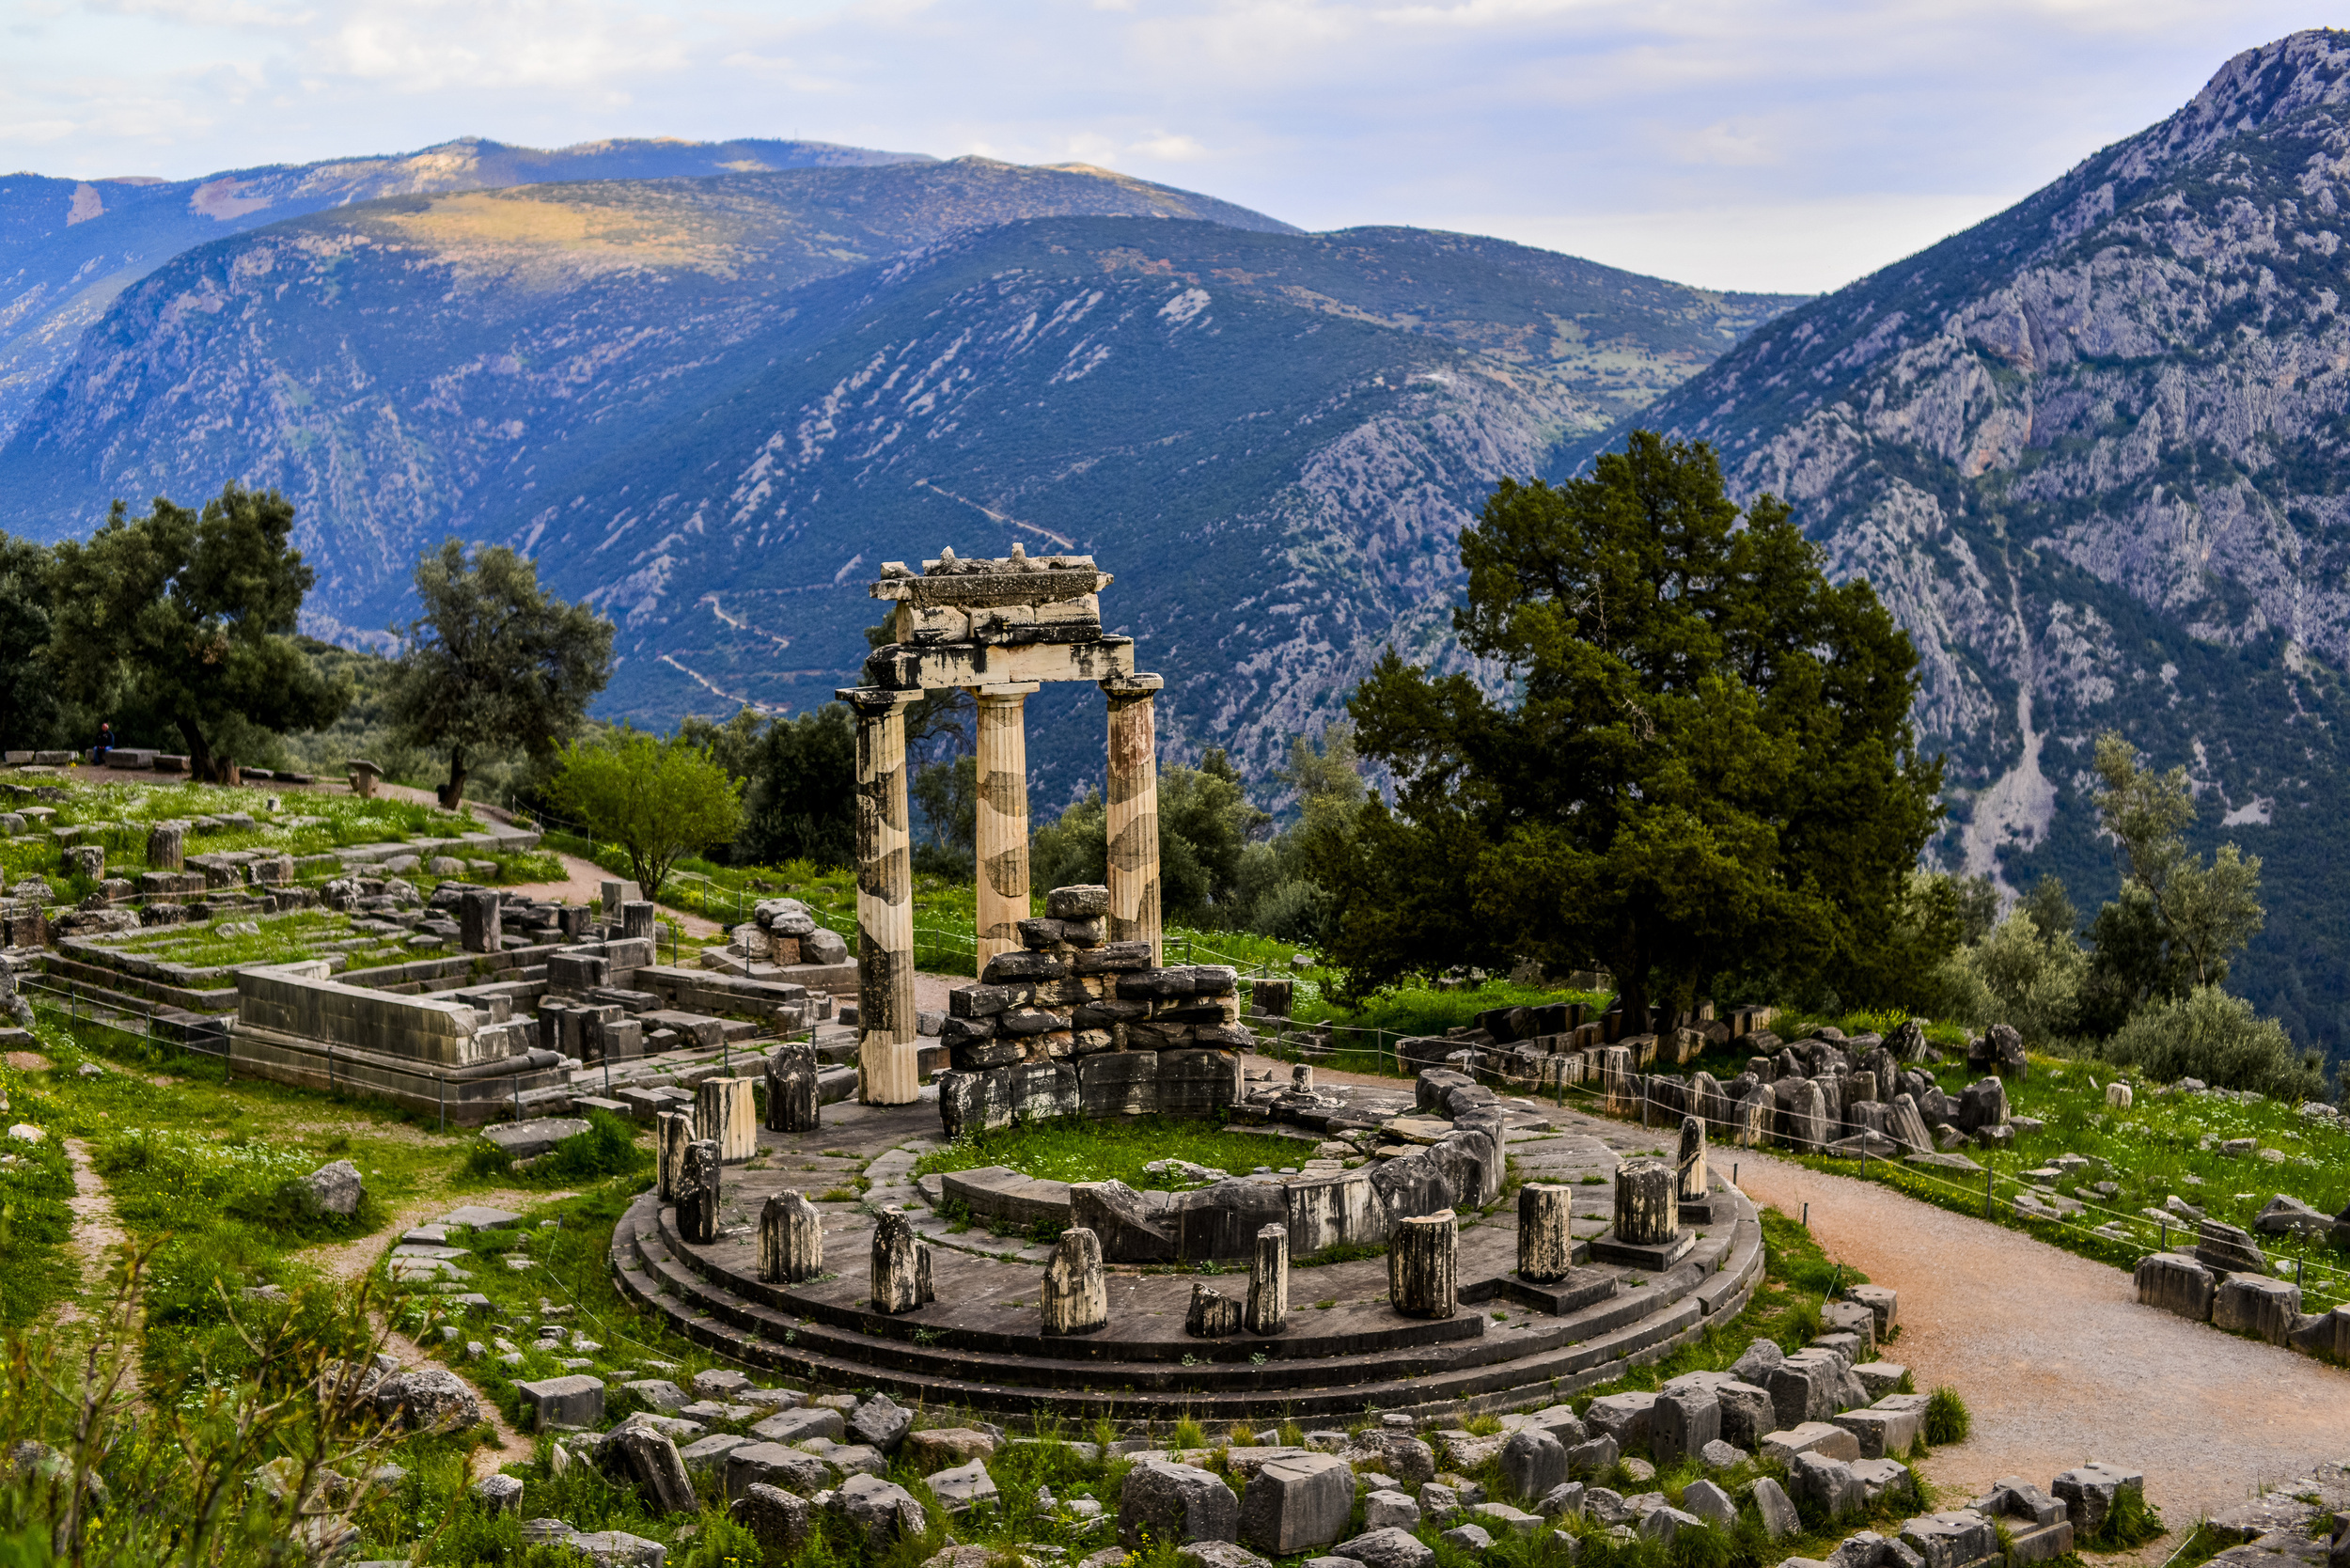 <p>This UNESCO World Heritage site is just a couple hours from the Greek capital. It’s a must-visit if you’re a history or archeology buff. In ancient times, the town was known as the home of the Oracle, Delphi, and a naval stronghold. These days, it houses some of the most impressive ruins in the country.</p><p>You may also like: <a href='https://www.yardbarker.com/lifestyle/articles/18_worldwide_destinations_perfect_for_nature_lovers_021524/s1__38973641'>18 worldwide destinations perfect for nature lovers</a></p>